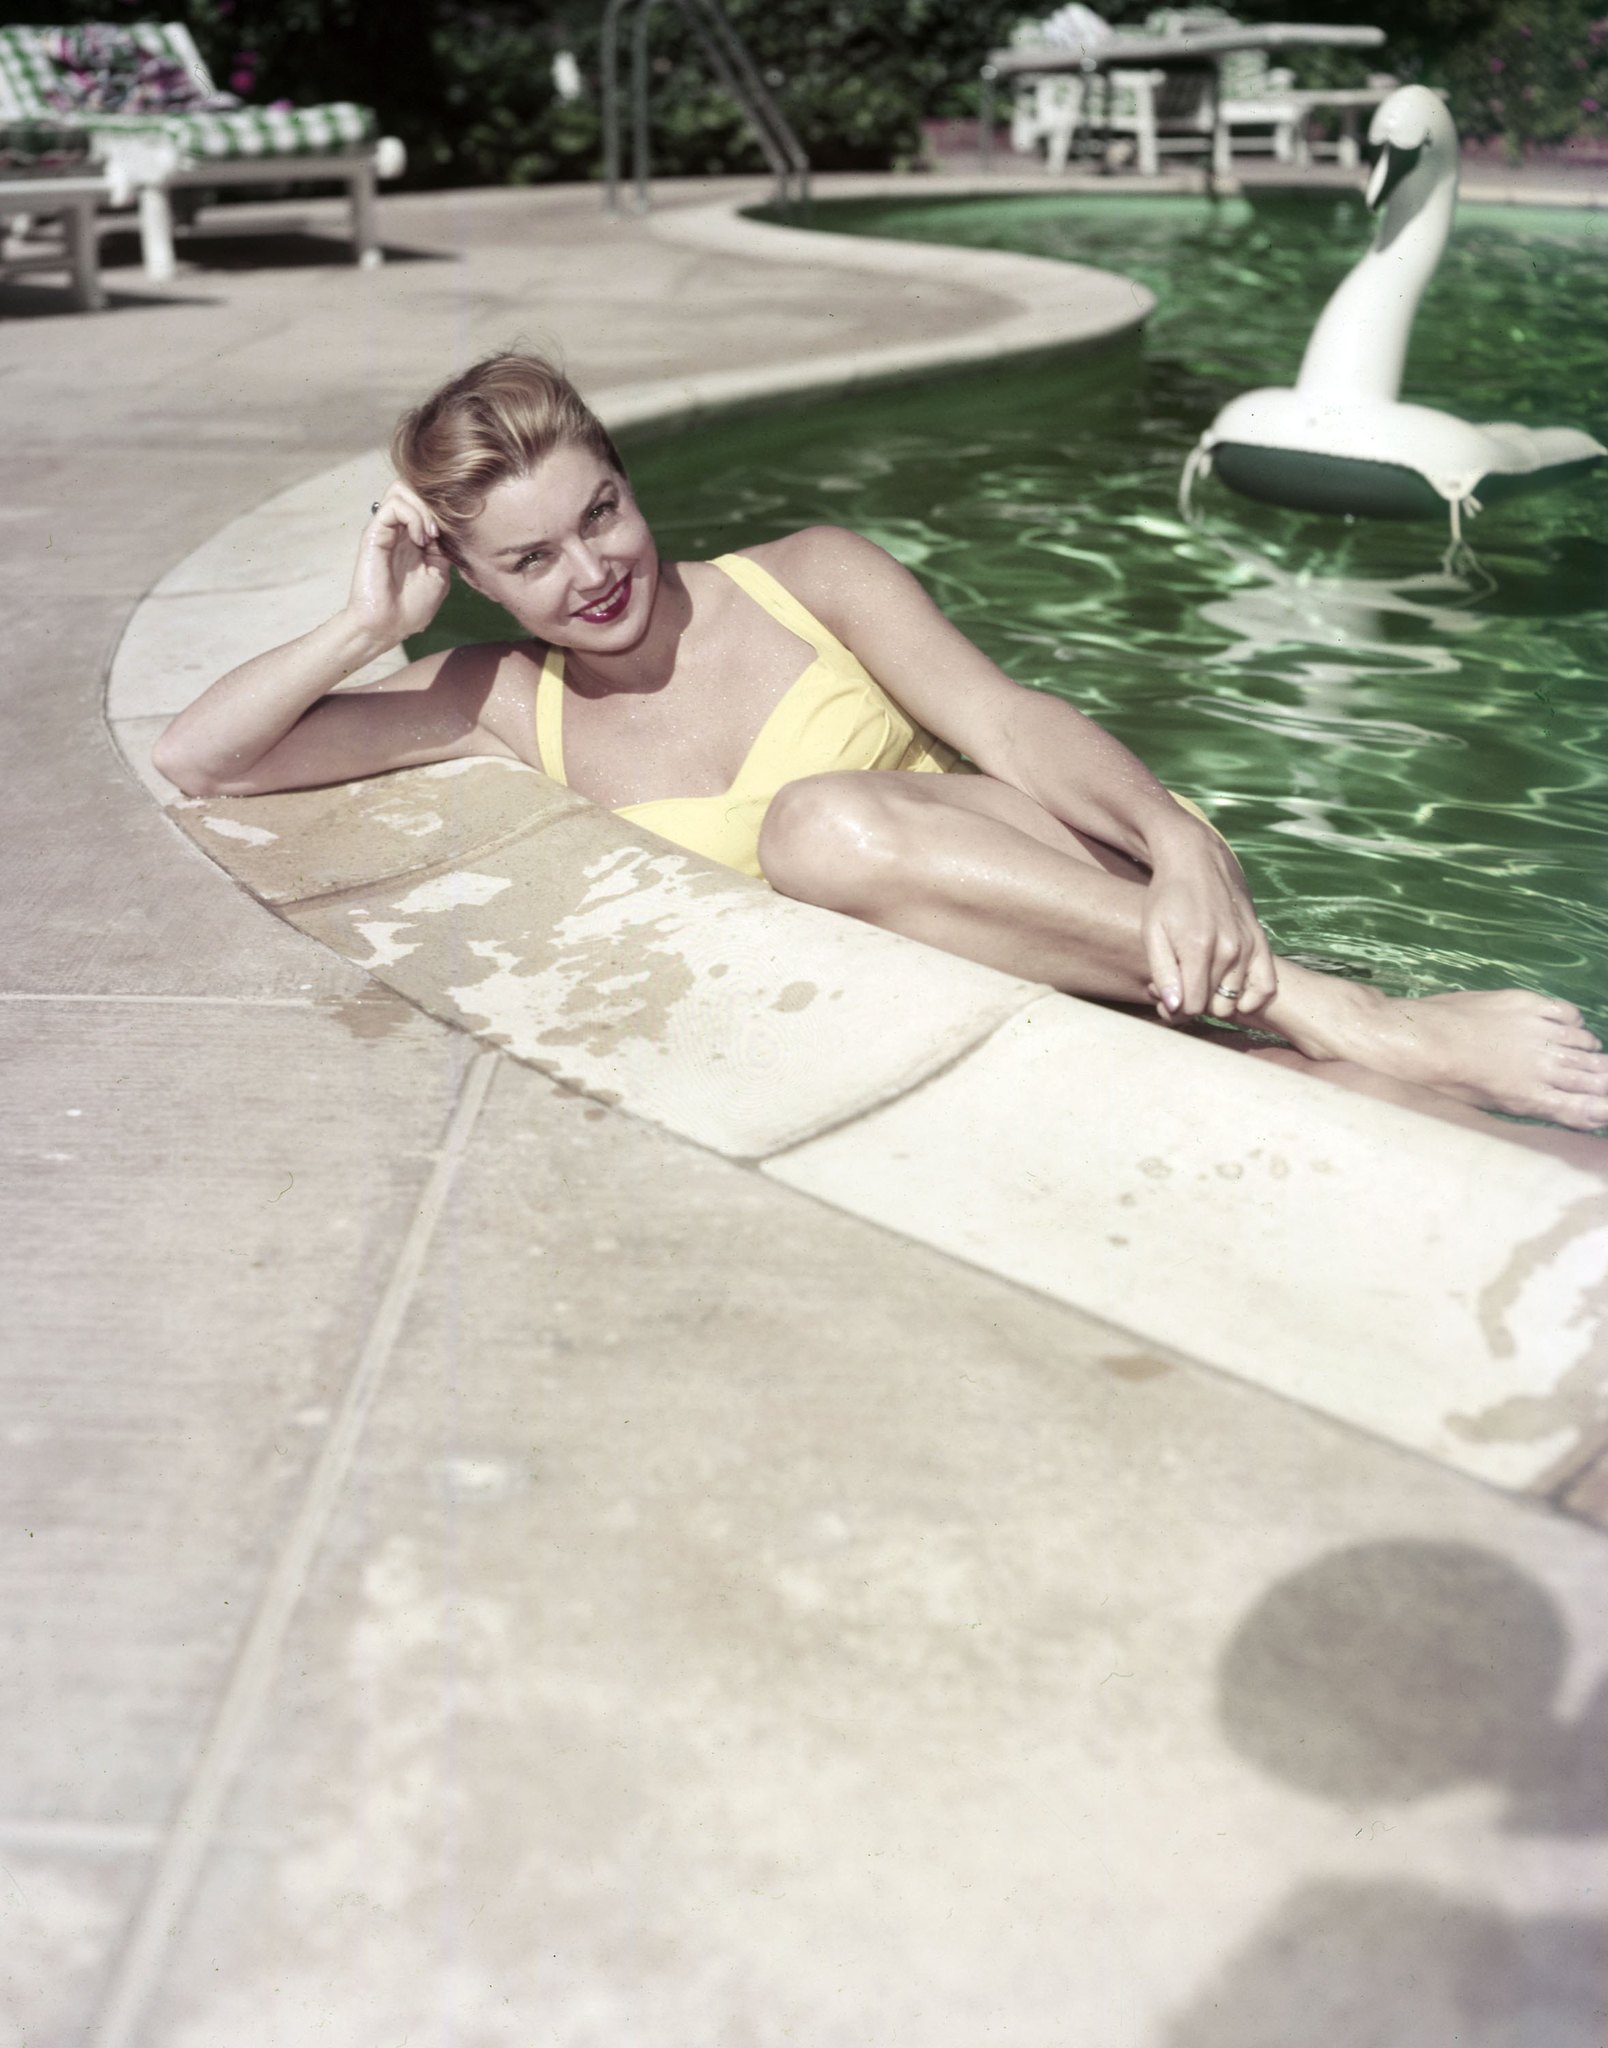 Esther Williams at event of The Esther Williams Aqua Spectacle (1956)